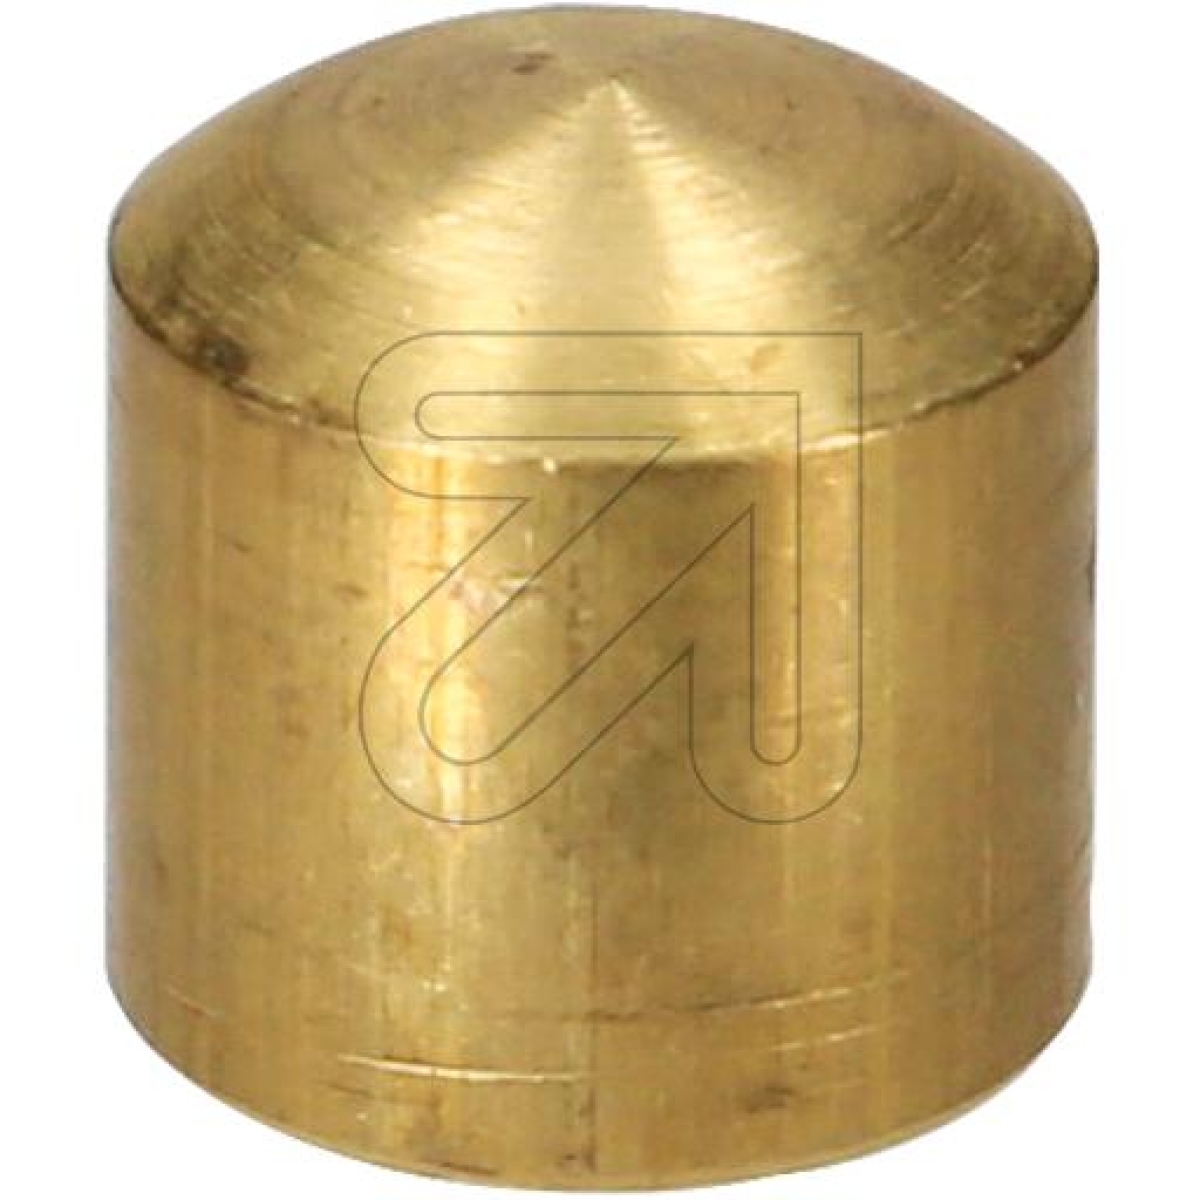 D. W. BendlerClosing button raw brass M10 inside 1880.1212.0101.3101-Price for 5 pcs.Article-No: 601900